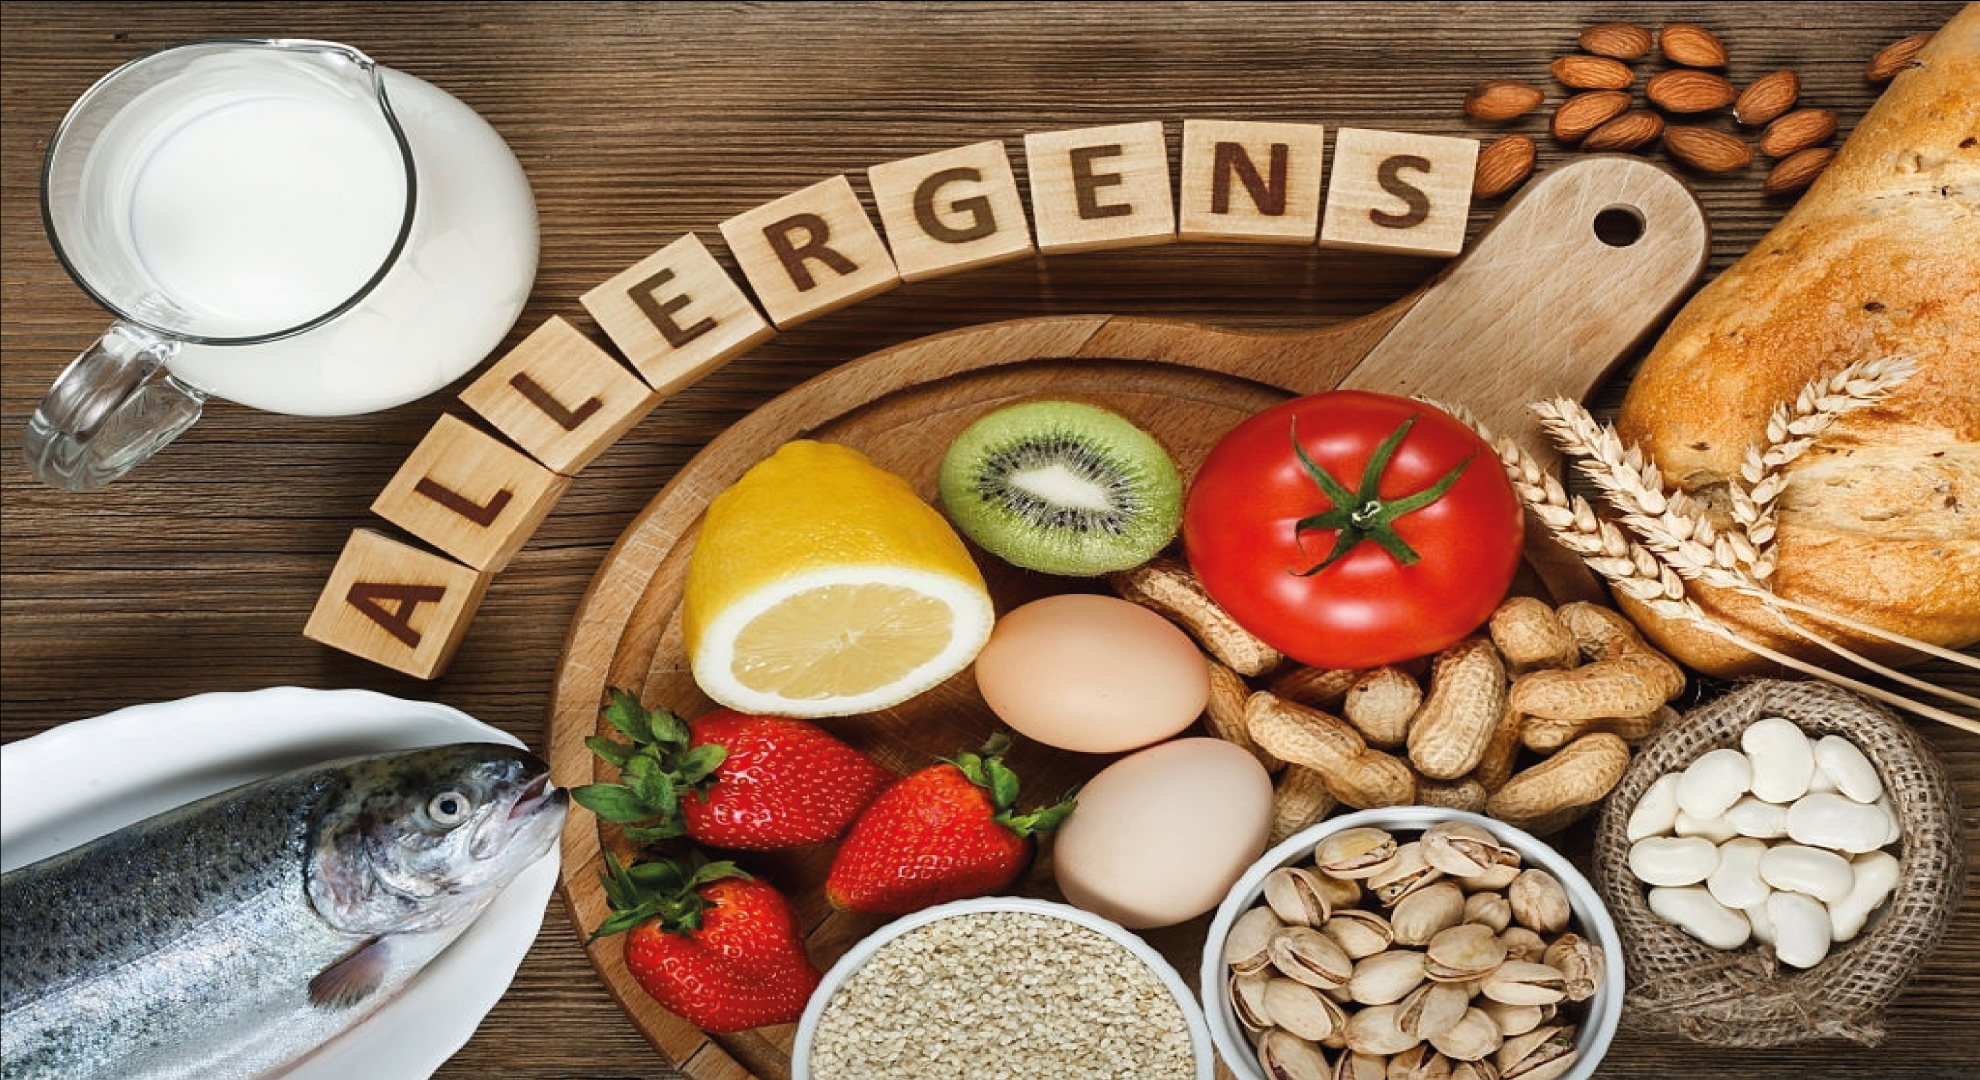 12---Food-Allergies-Why-Gluten-Is-Bad-For-Some-People1